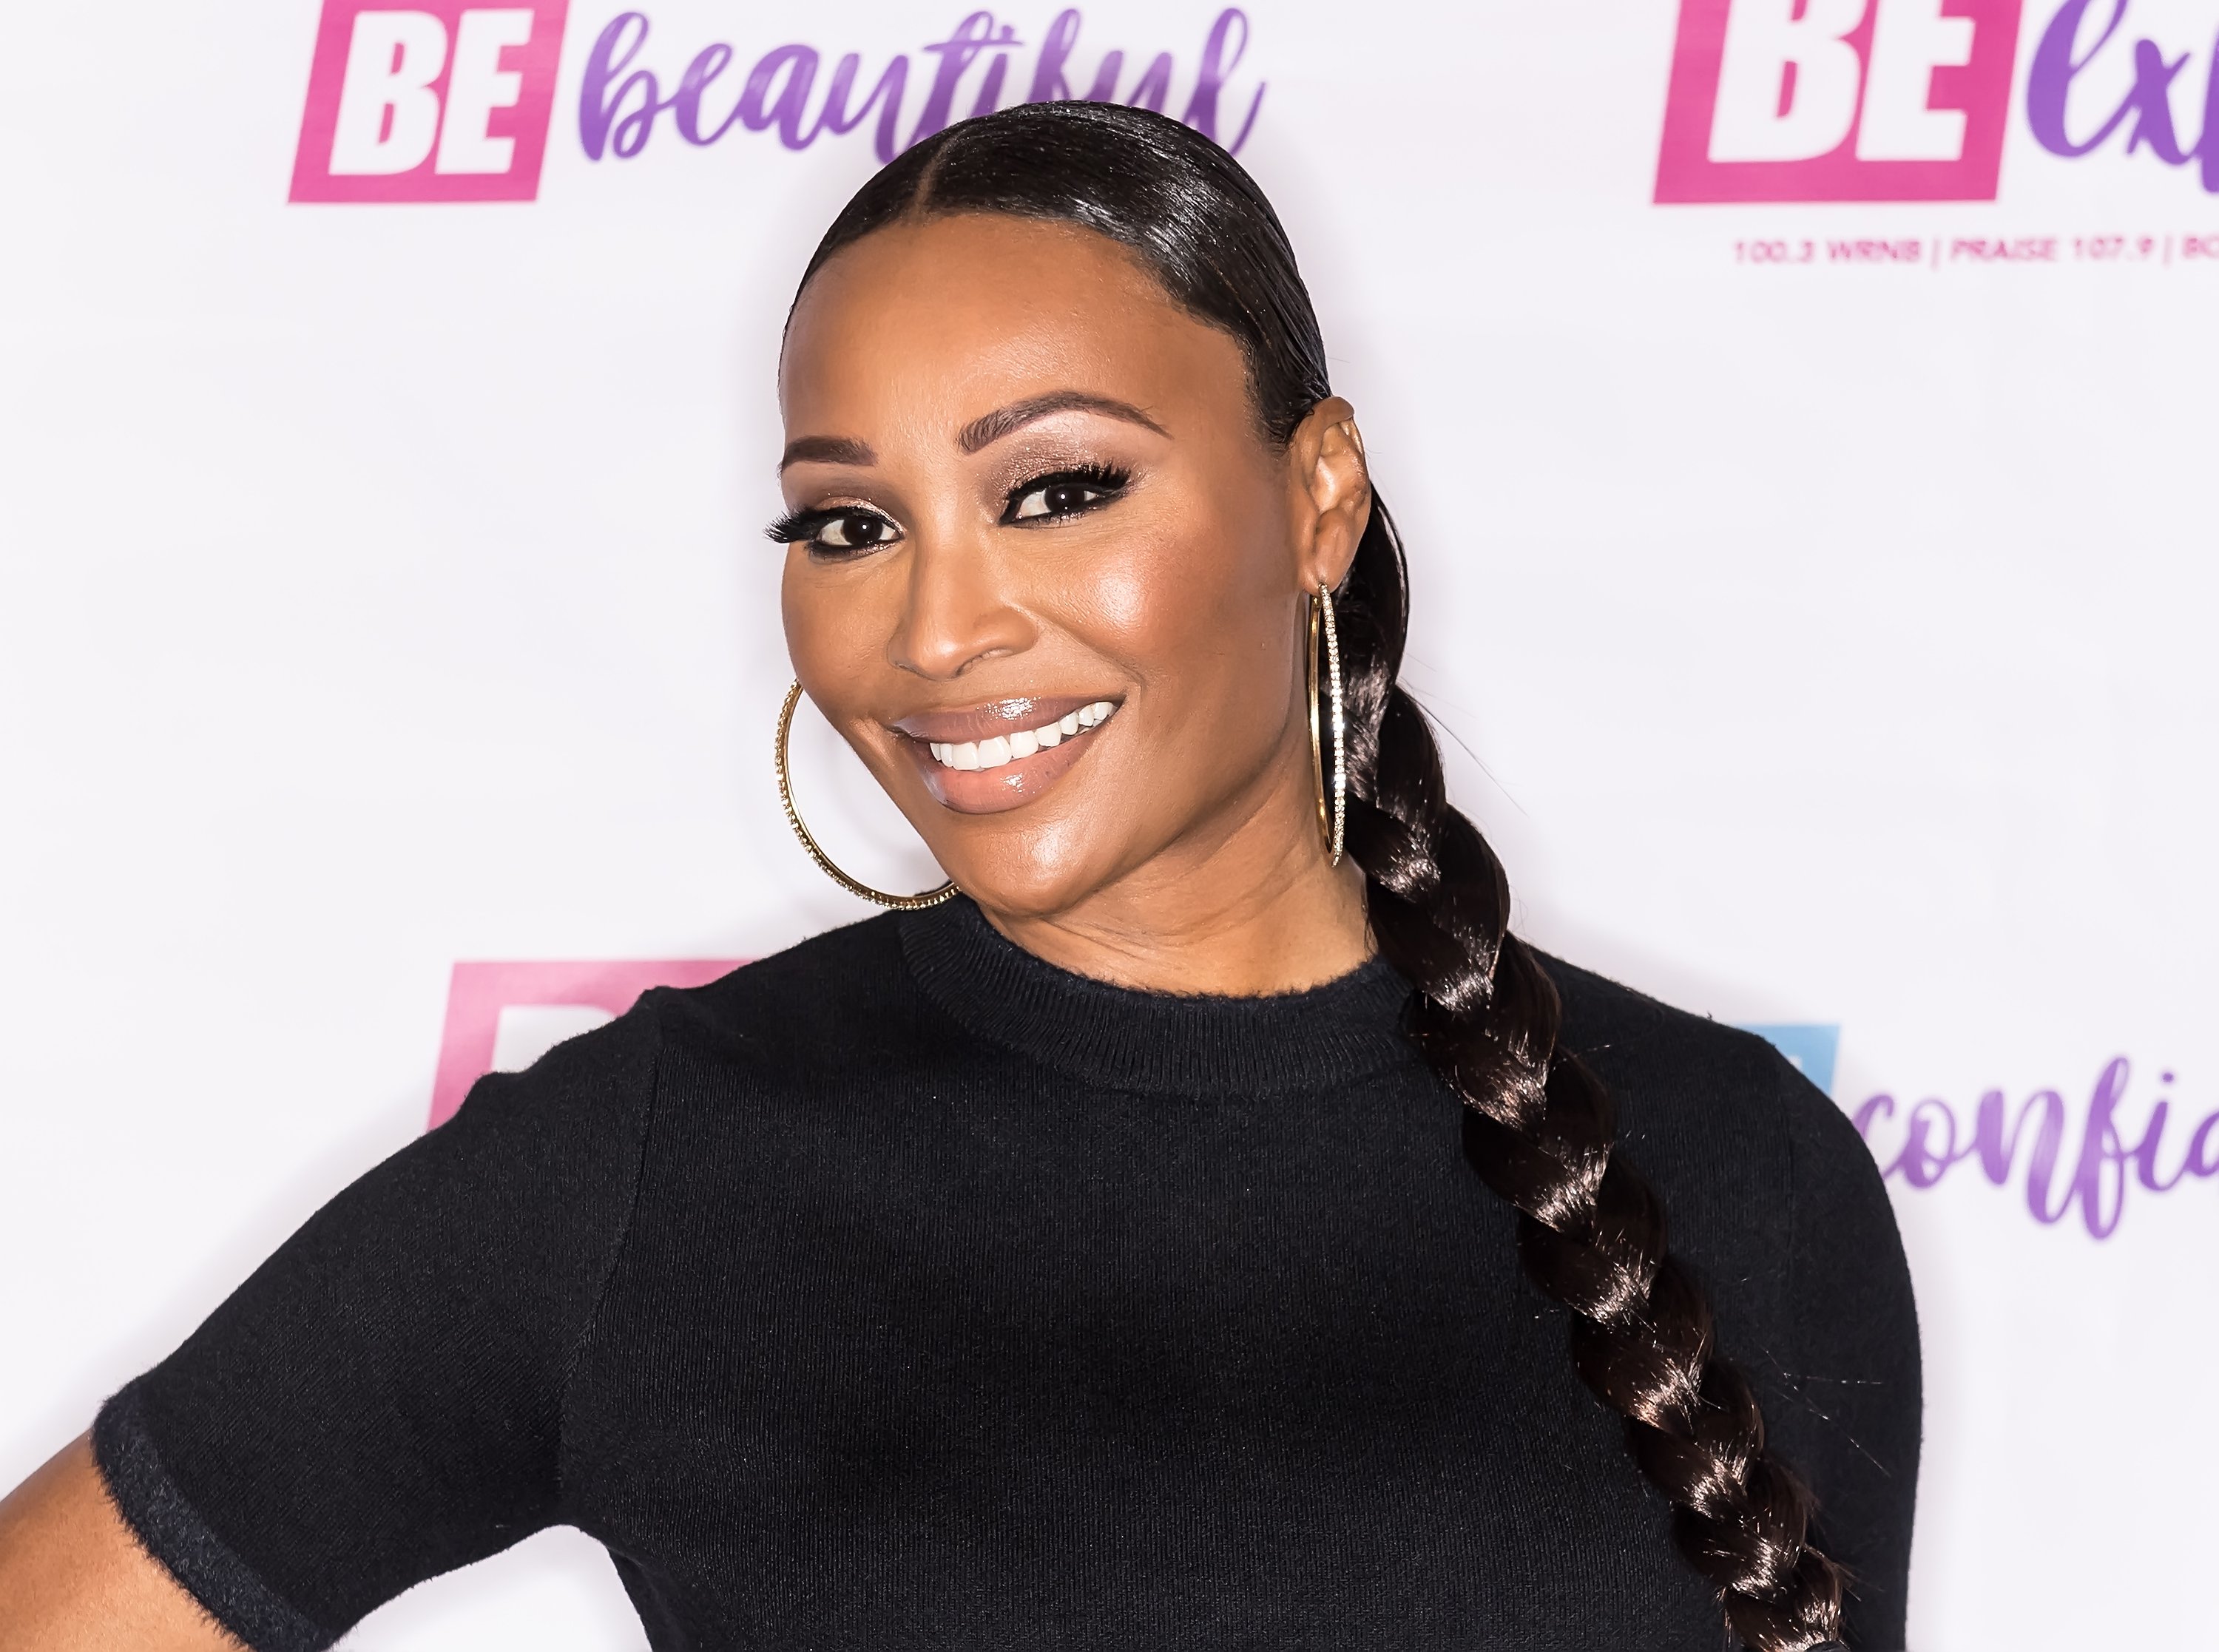 Cynthia Bailey attending the Be Expo in Pennsylvania in March 2018. | Photo: Getty Images